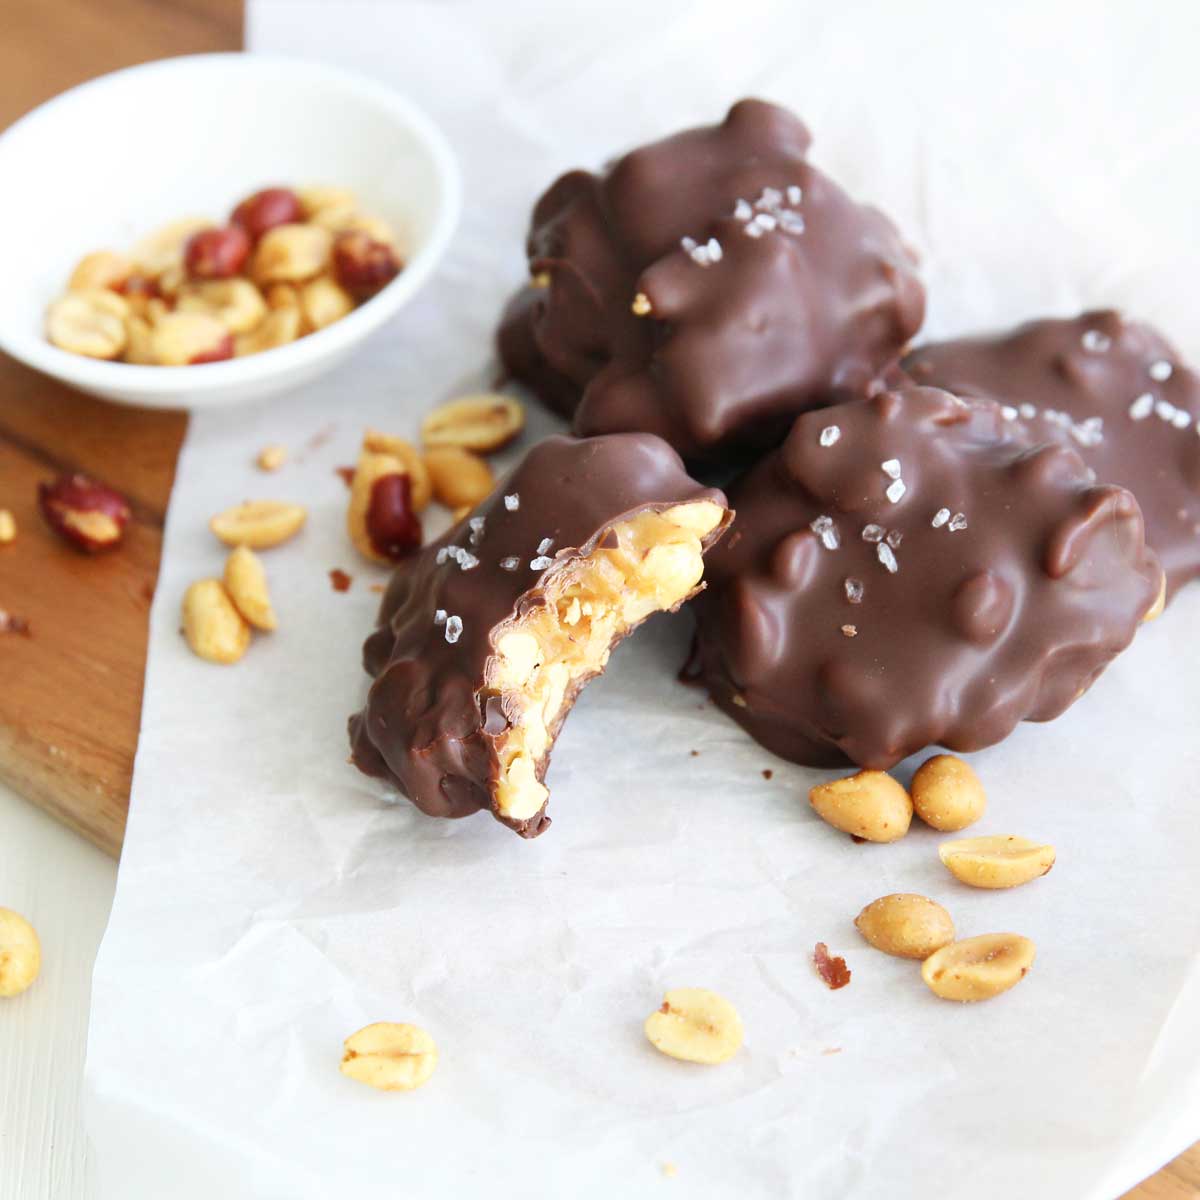 Chocolate Peanut Clusters with Collagen Caramel Filling (Easy, Keto Recipe) - Red Velvet Roll Cake